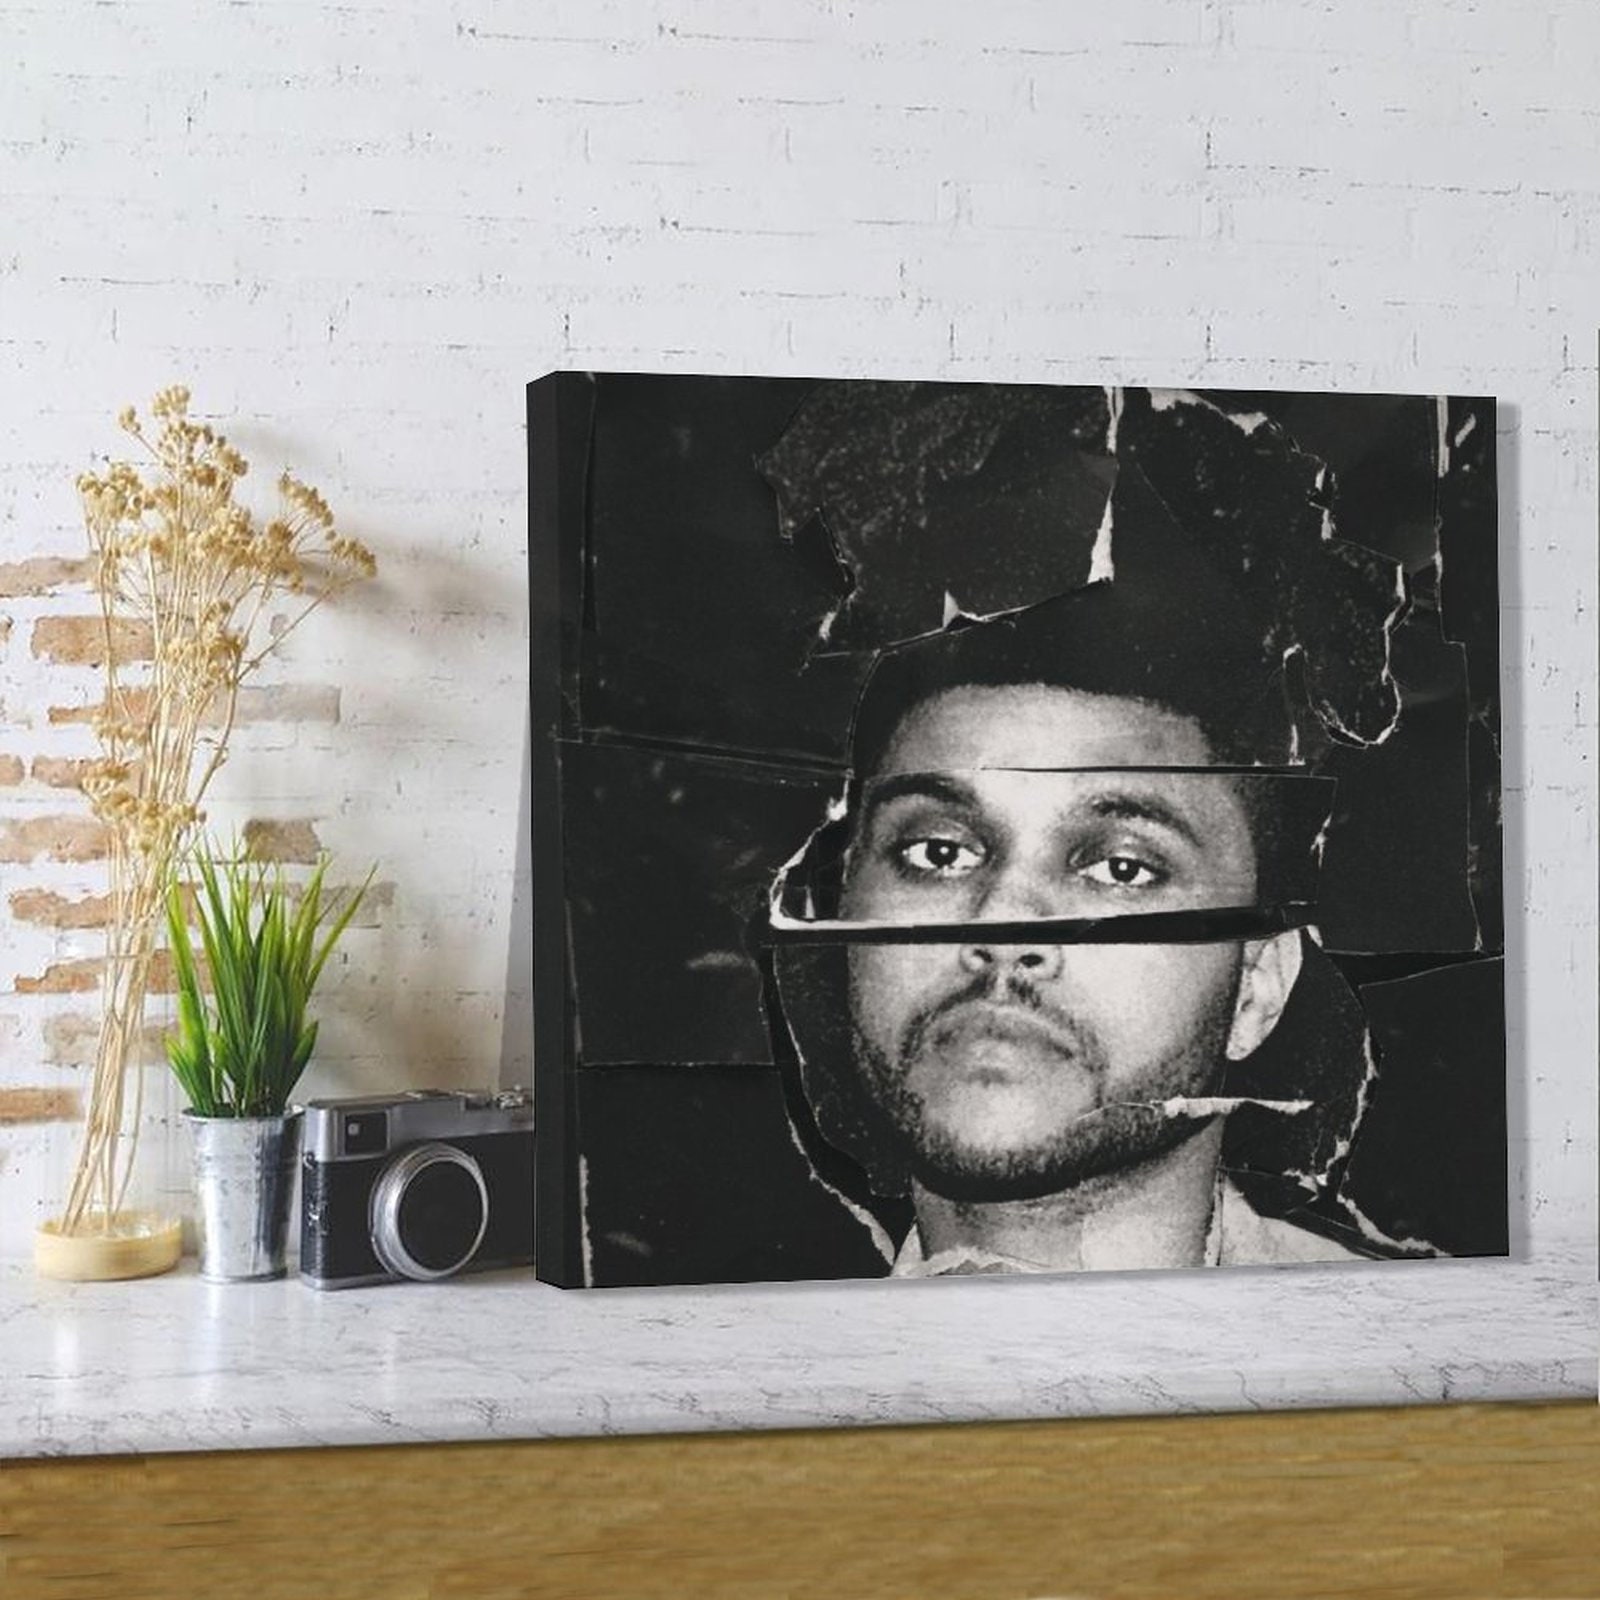 The Weeknd Beauty Behind the Madness Record Bowl TRANSLUCENT YELLOW VINYL  Classic R&B / Pop 12 Vinyl Collectible / Wall Decor 